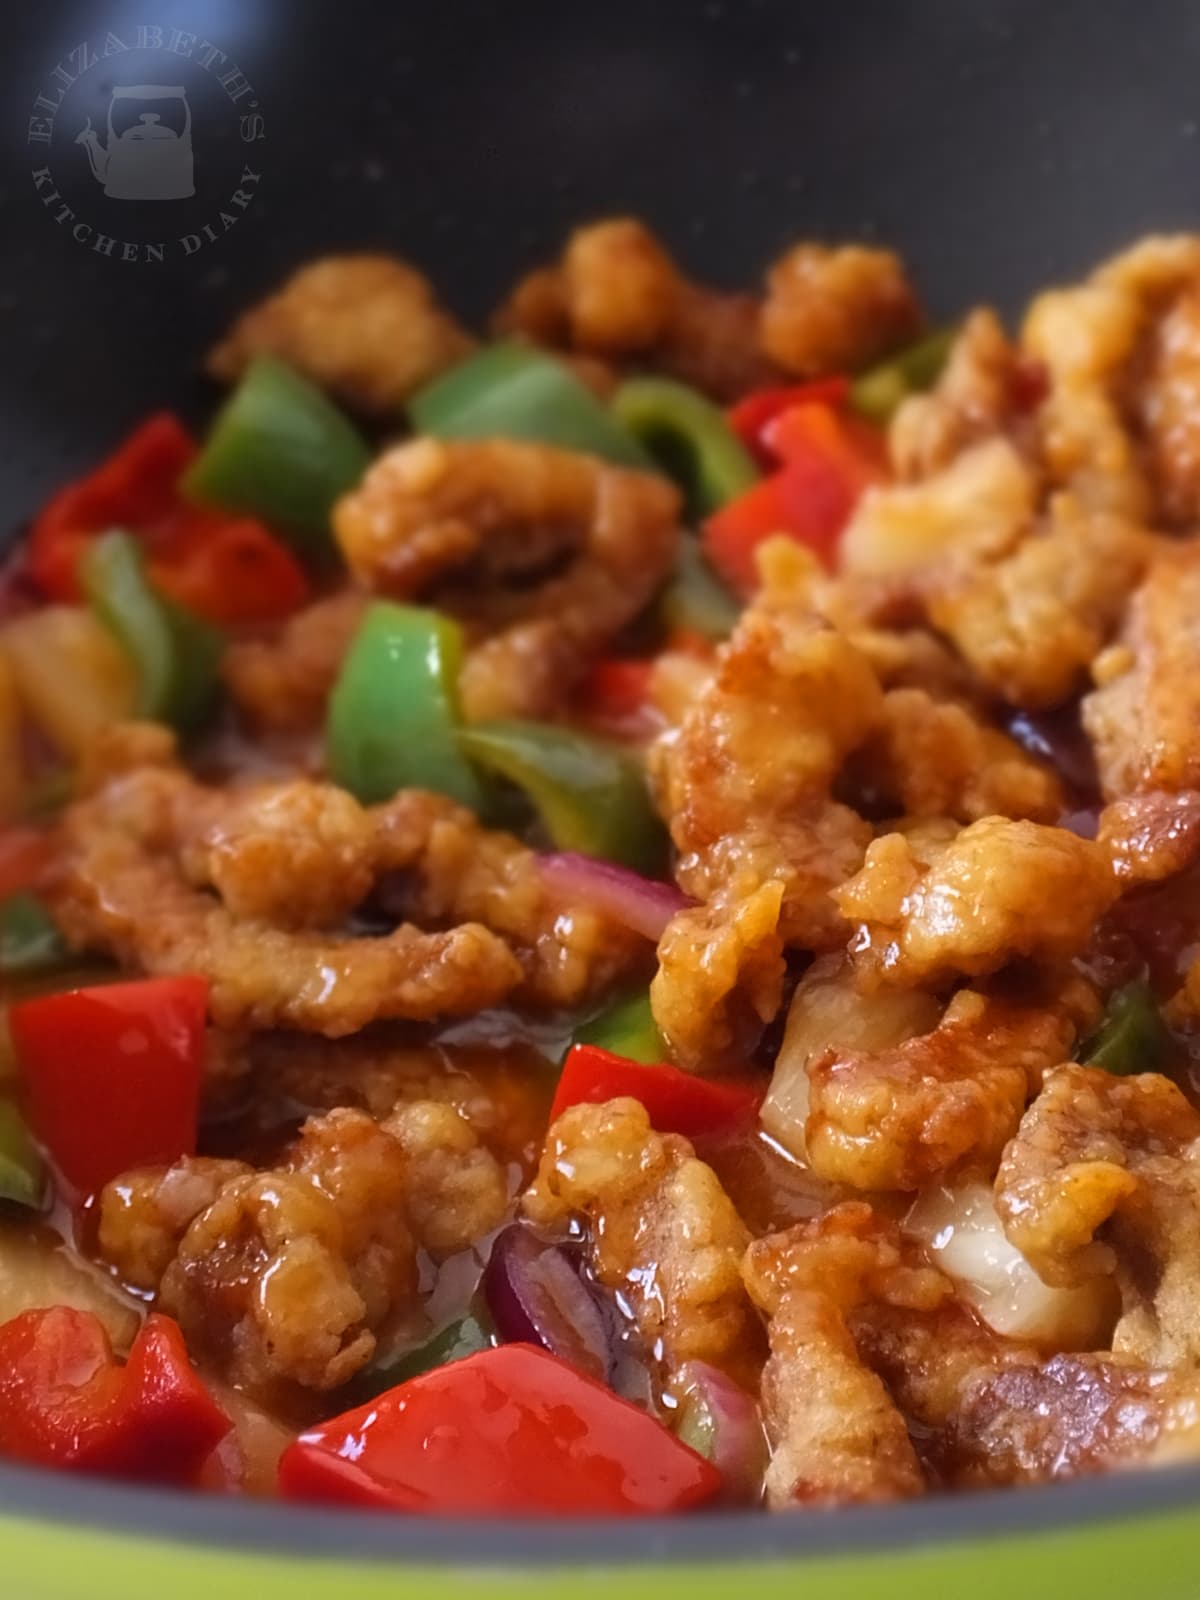 Image of sweet and sour pork.